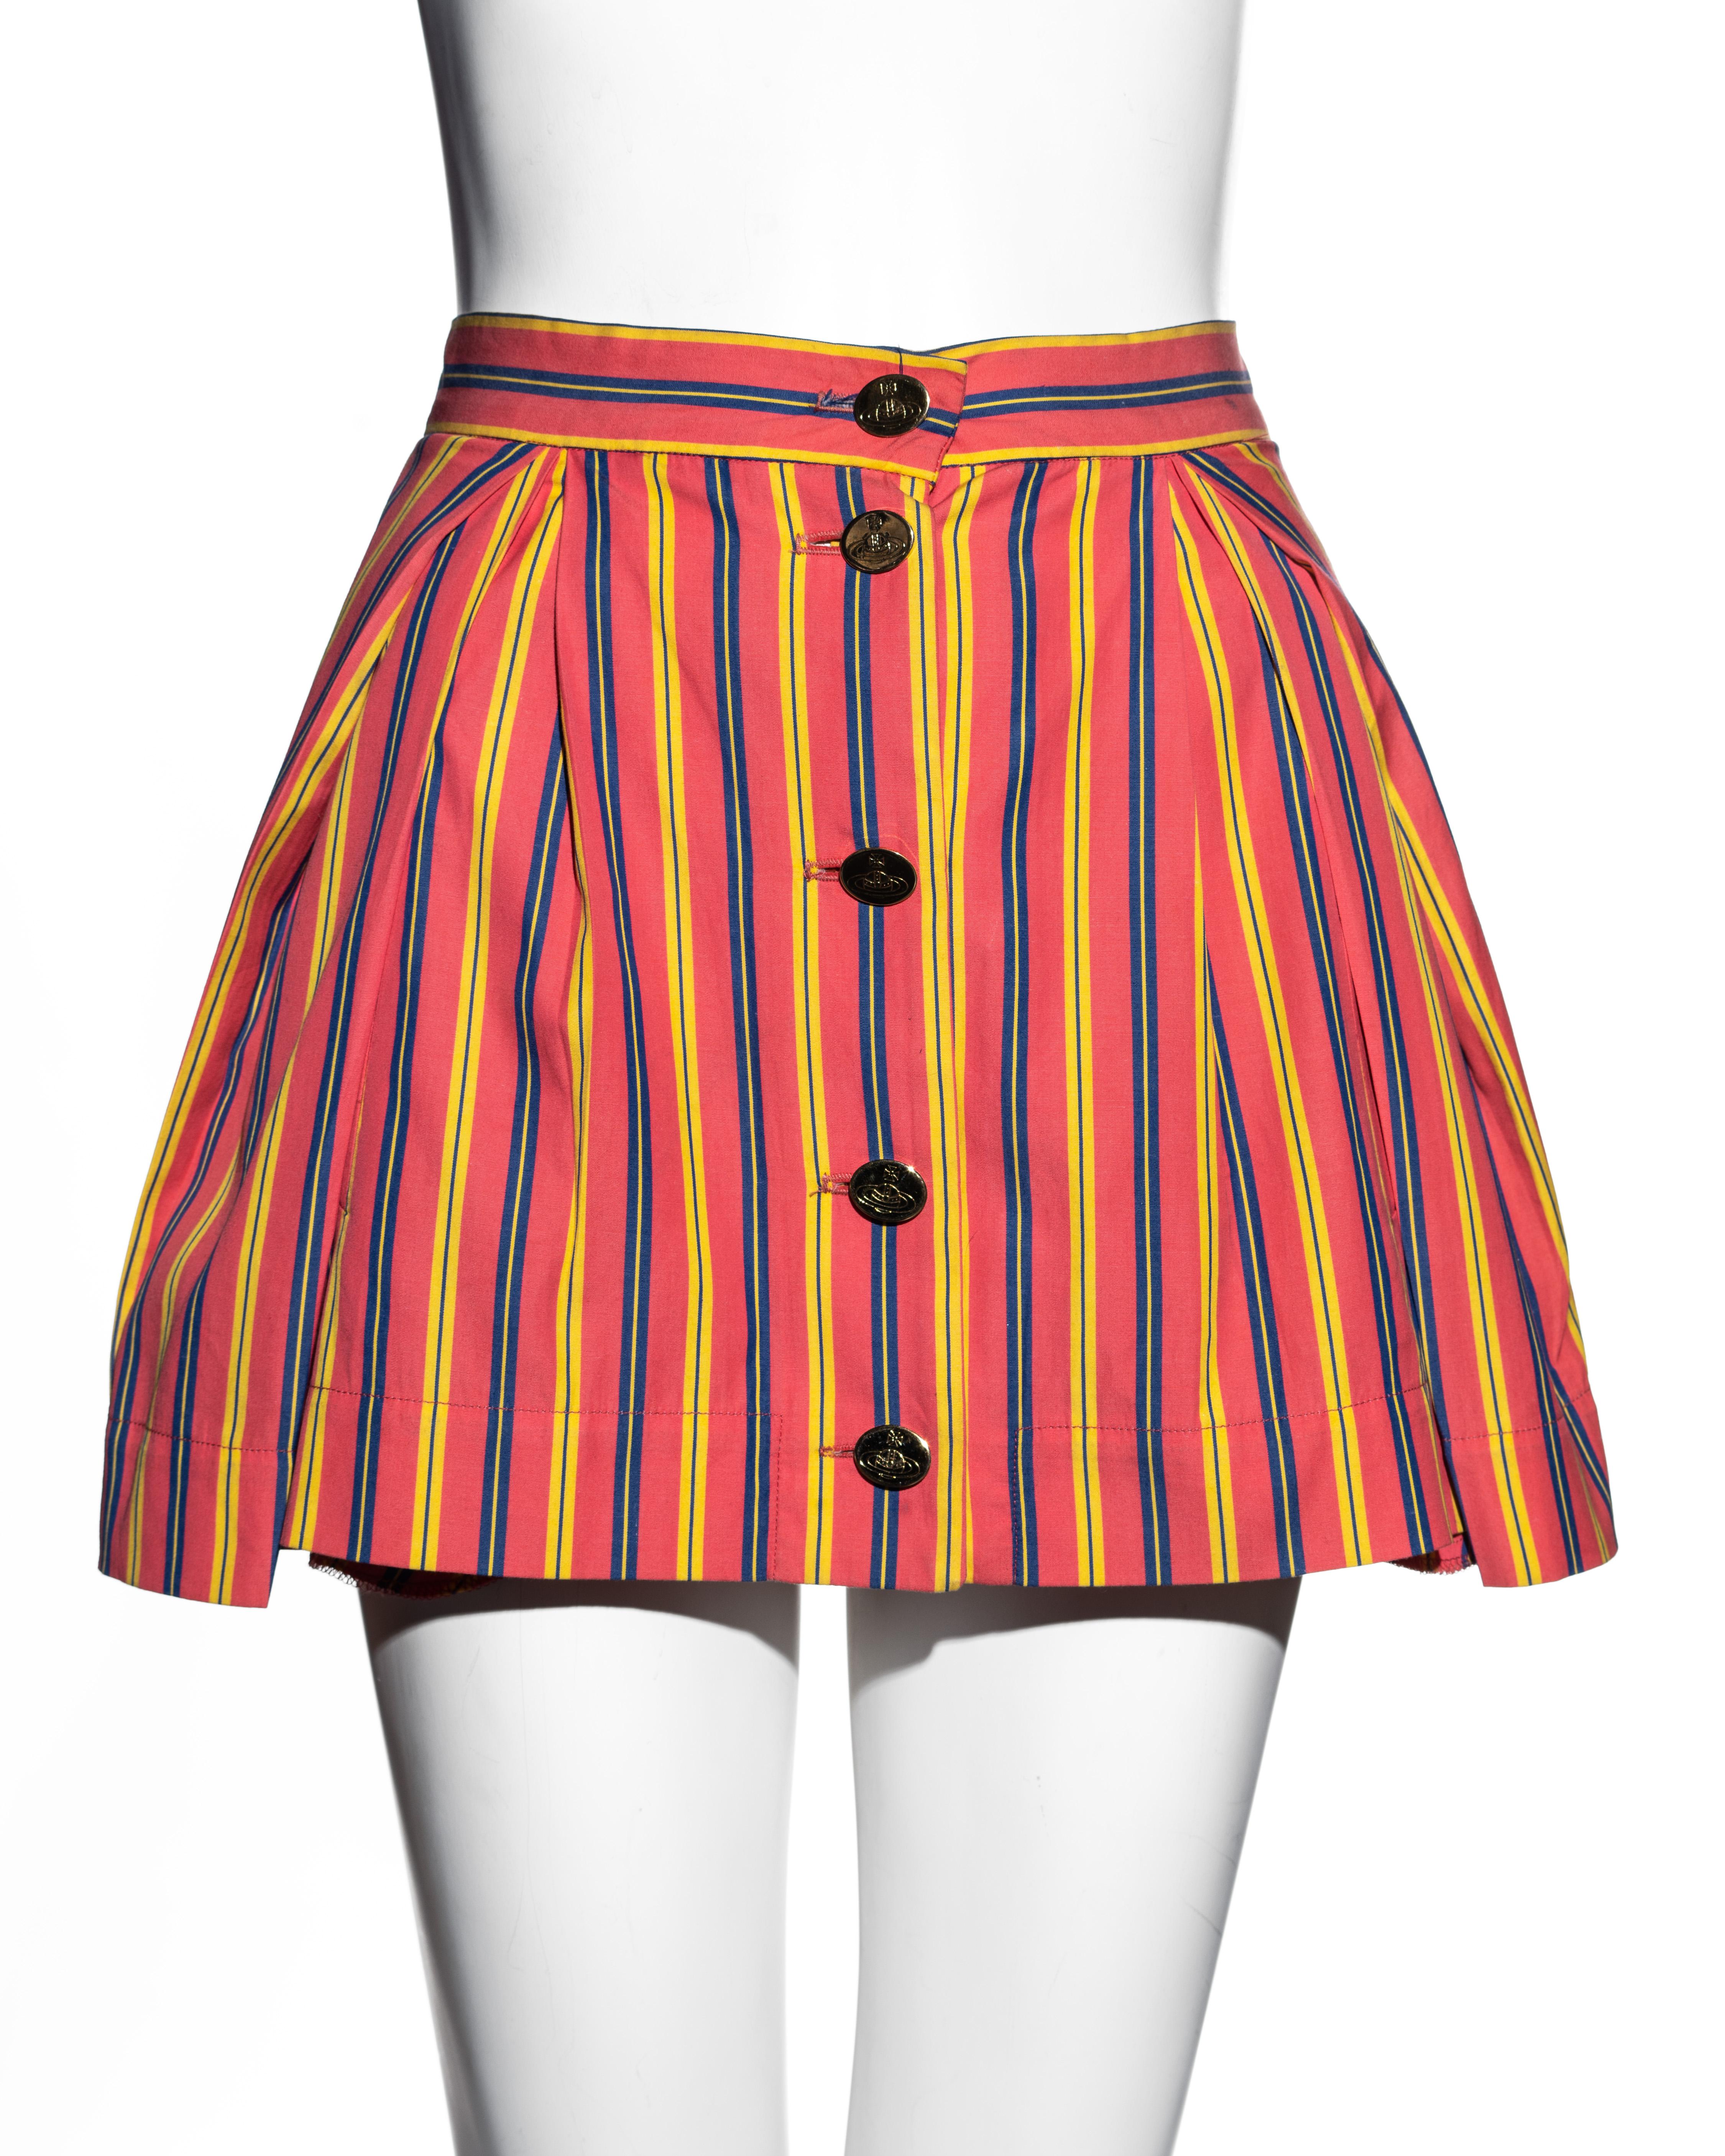 ▪ Vivienne Westwood salmon pink cotton pleated mini skirt 
▪ Yellow and blue stripes with salmon pink ground 
▪ Gold orb etched buttons 
▪ Labelled UK '12' but fits smaller 
▪ Spring-Summer 1993